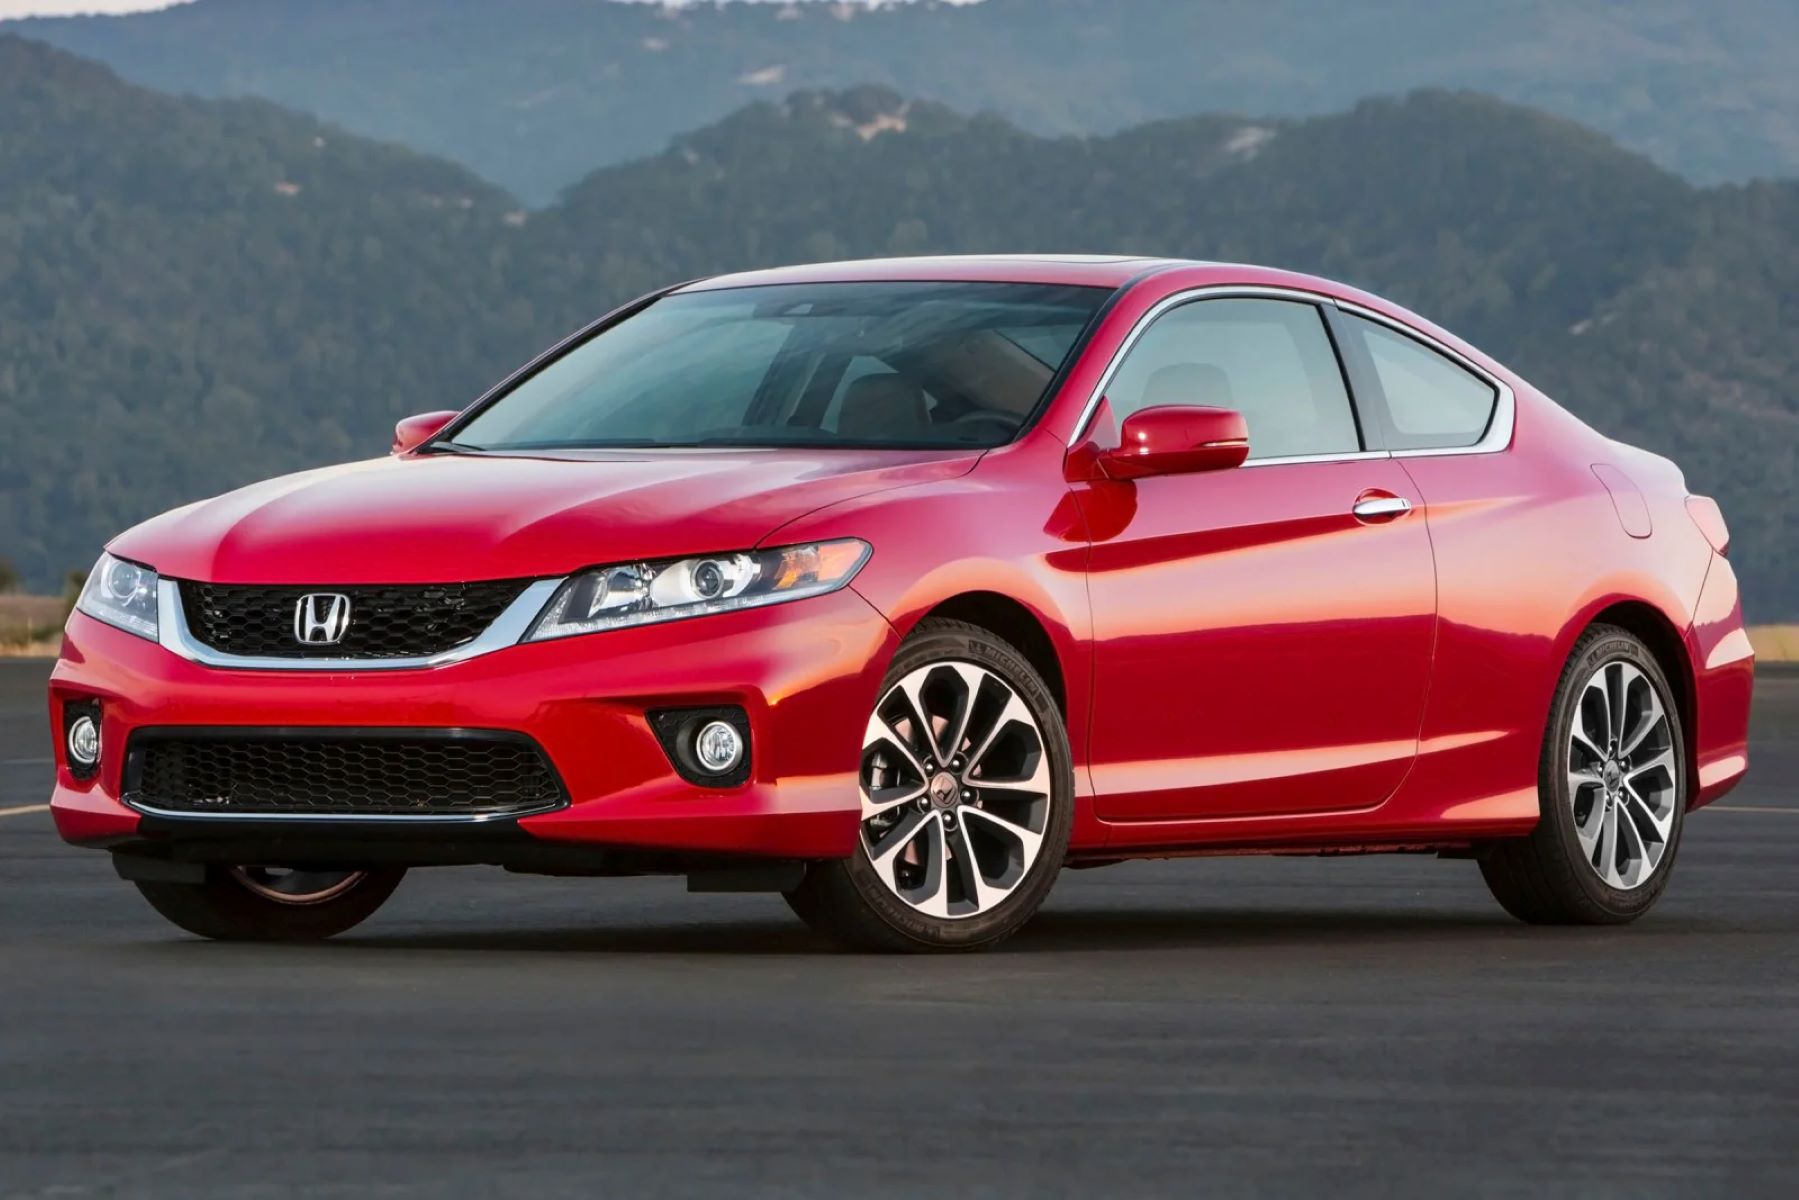 Top Choice For First Car: 2013-2015 Honda Accord With Over 100k Miles – Perfect For College Students!